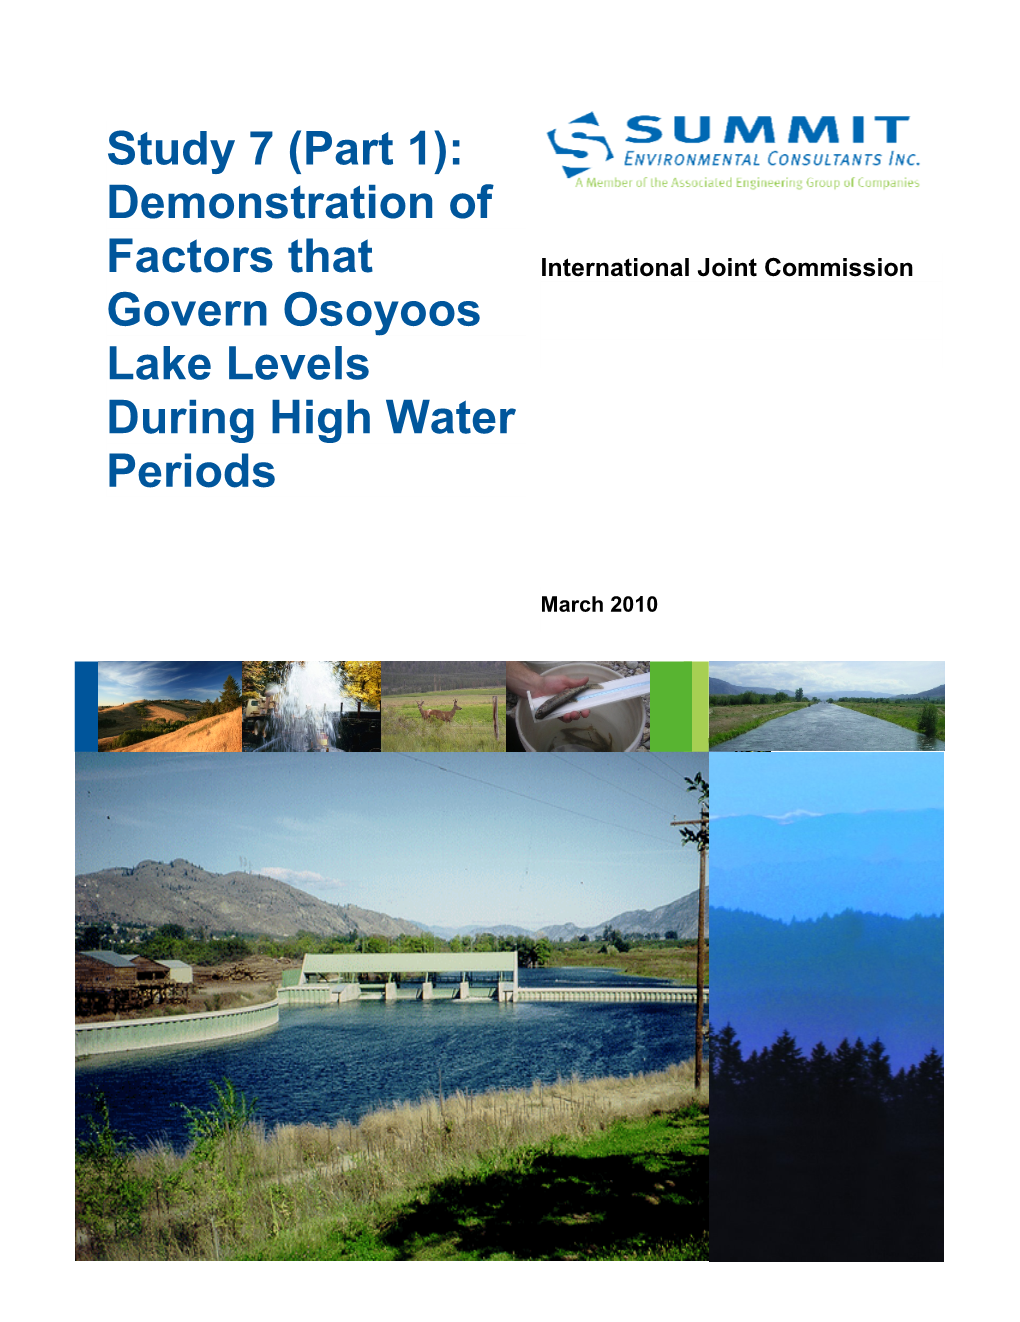 Study 7 (Part 1): Demonstration of Factors That Govern Osoyoos Lake